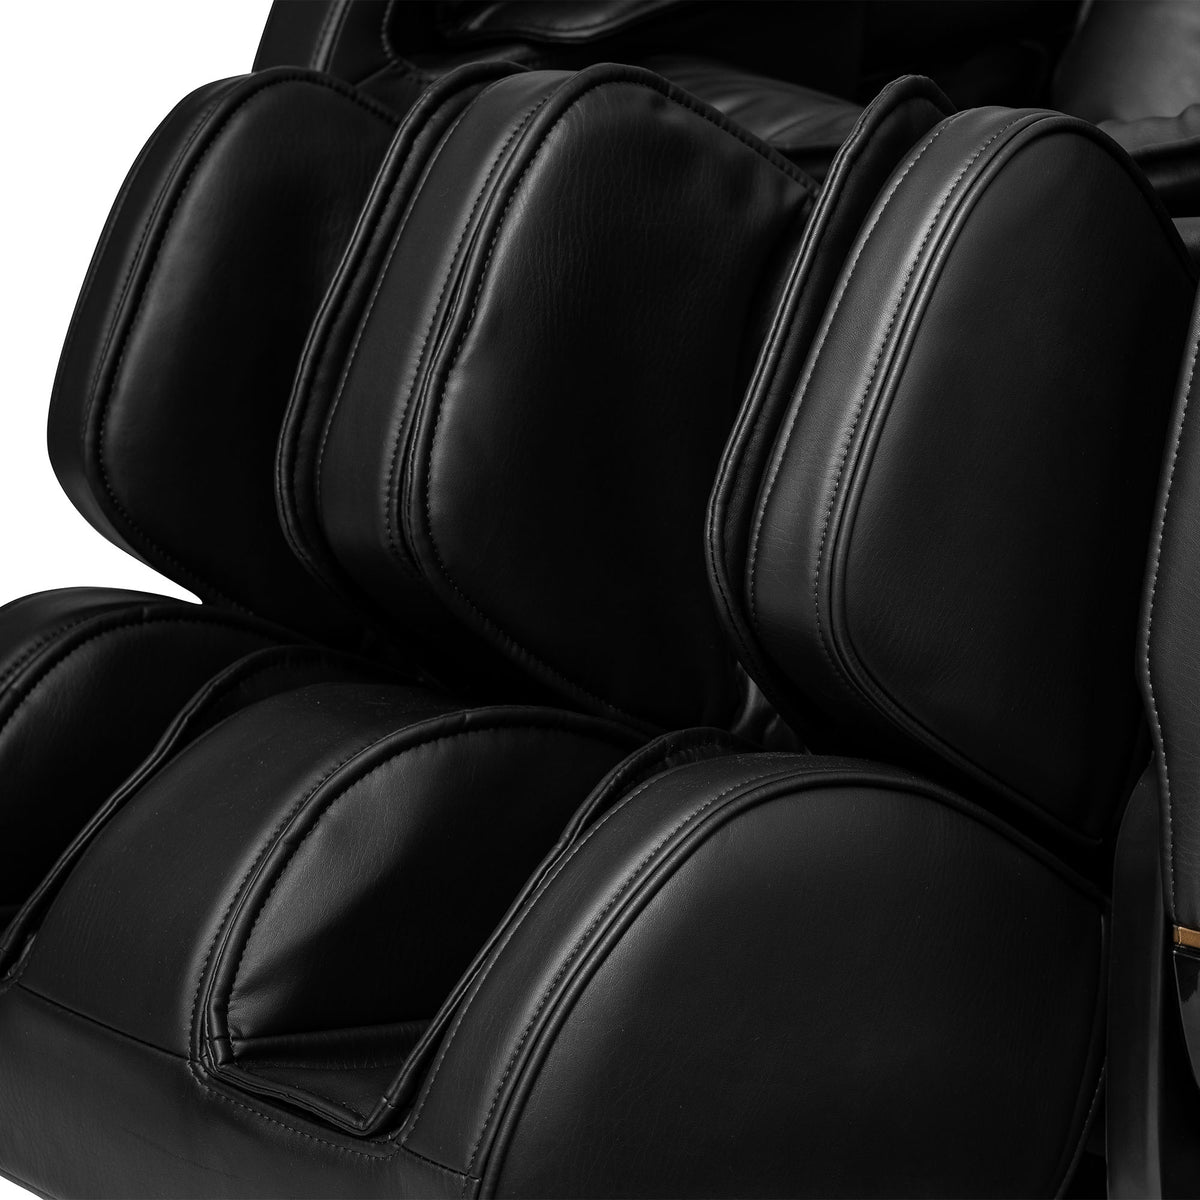 Thick cushioned massage seating positions showcased on the Inner Balance Wellness Jin 2.0 Massage Chair